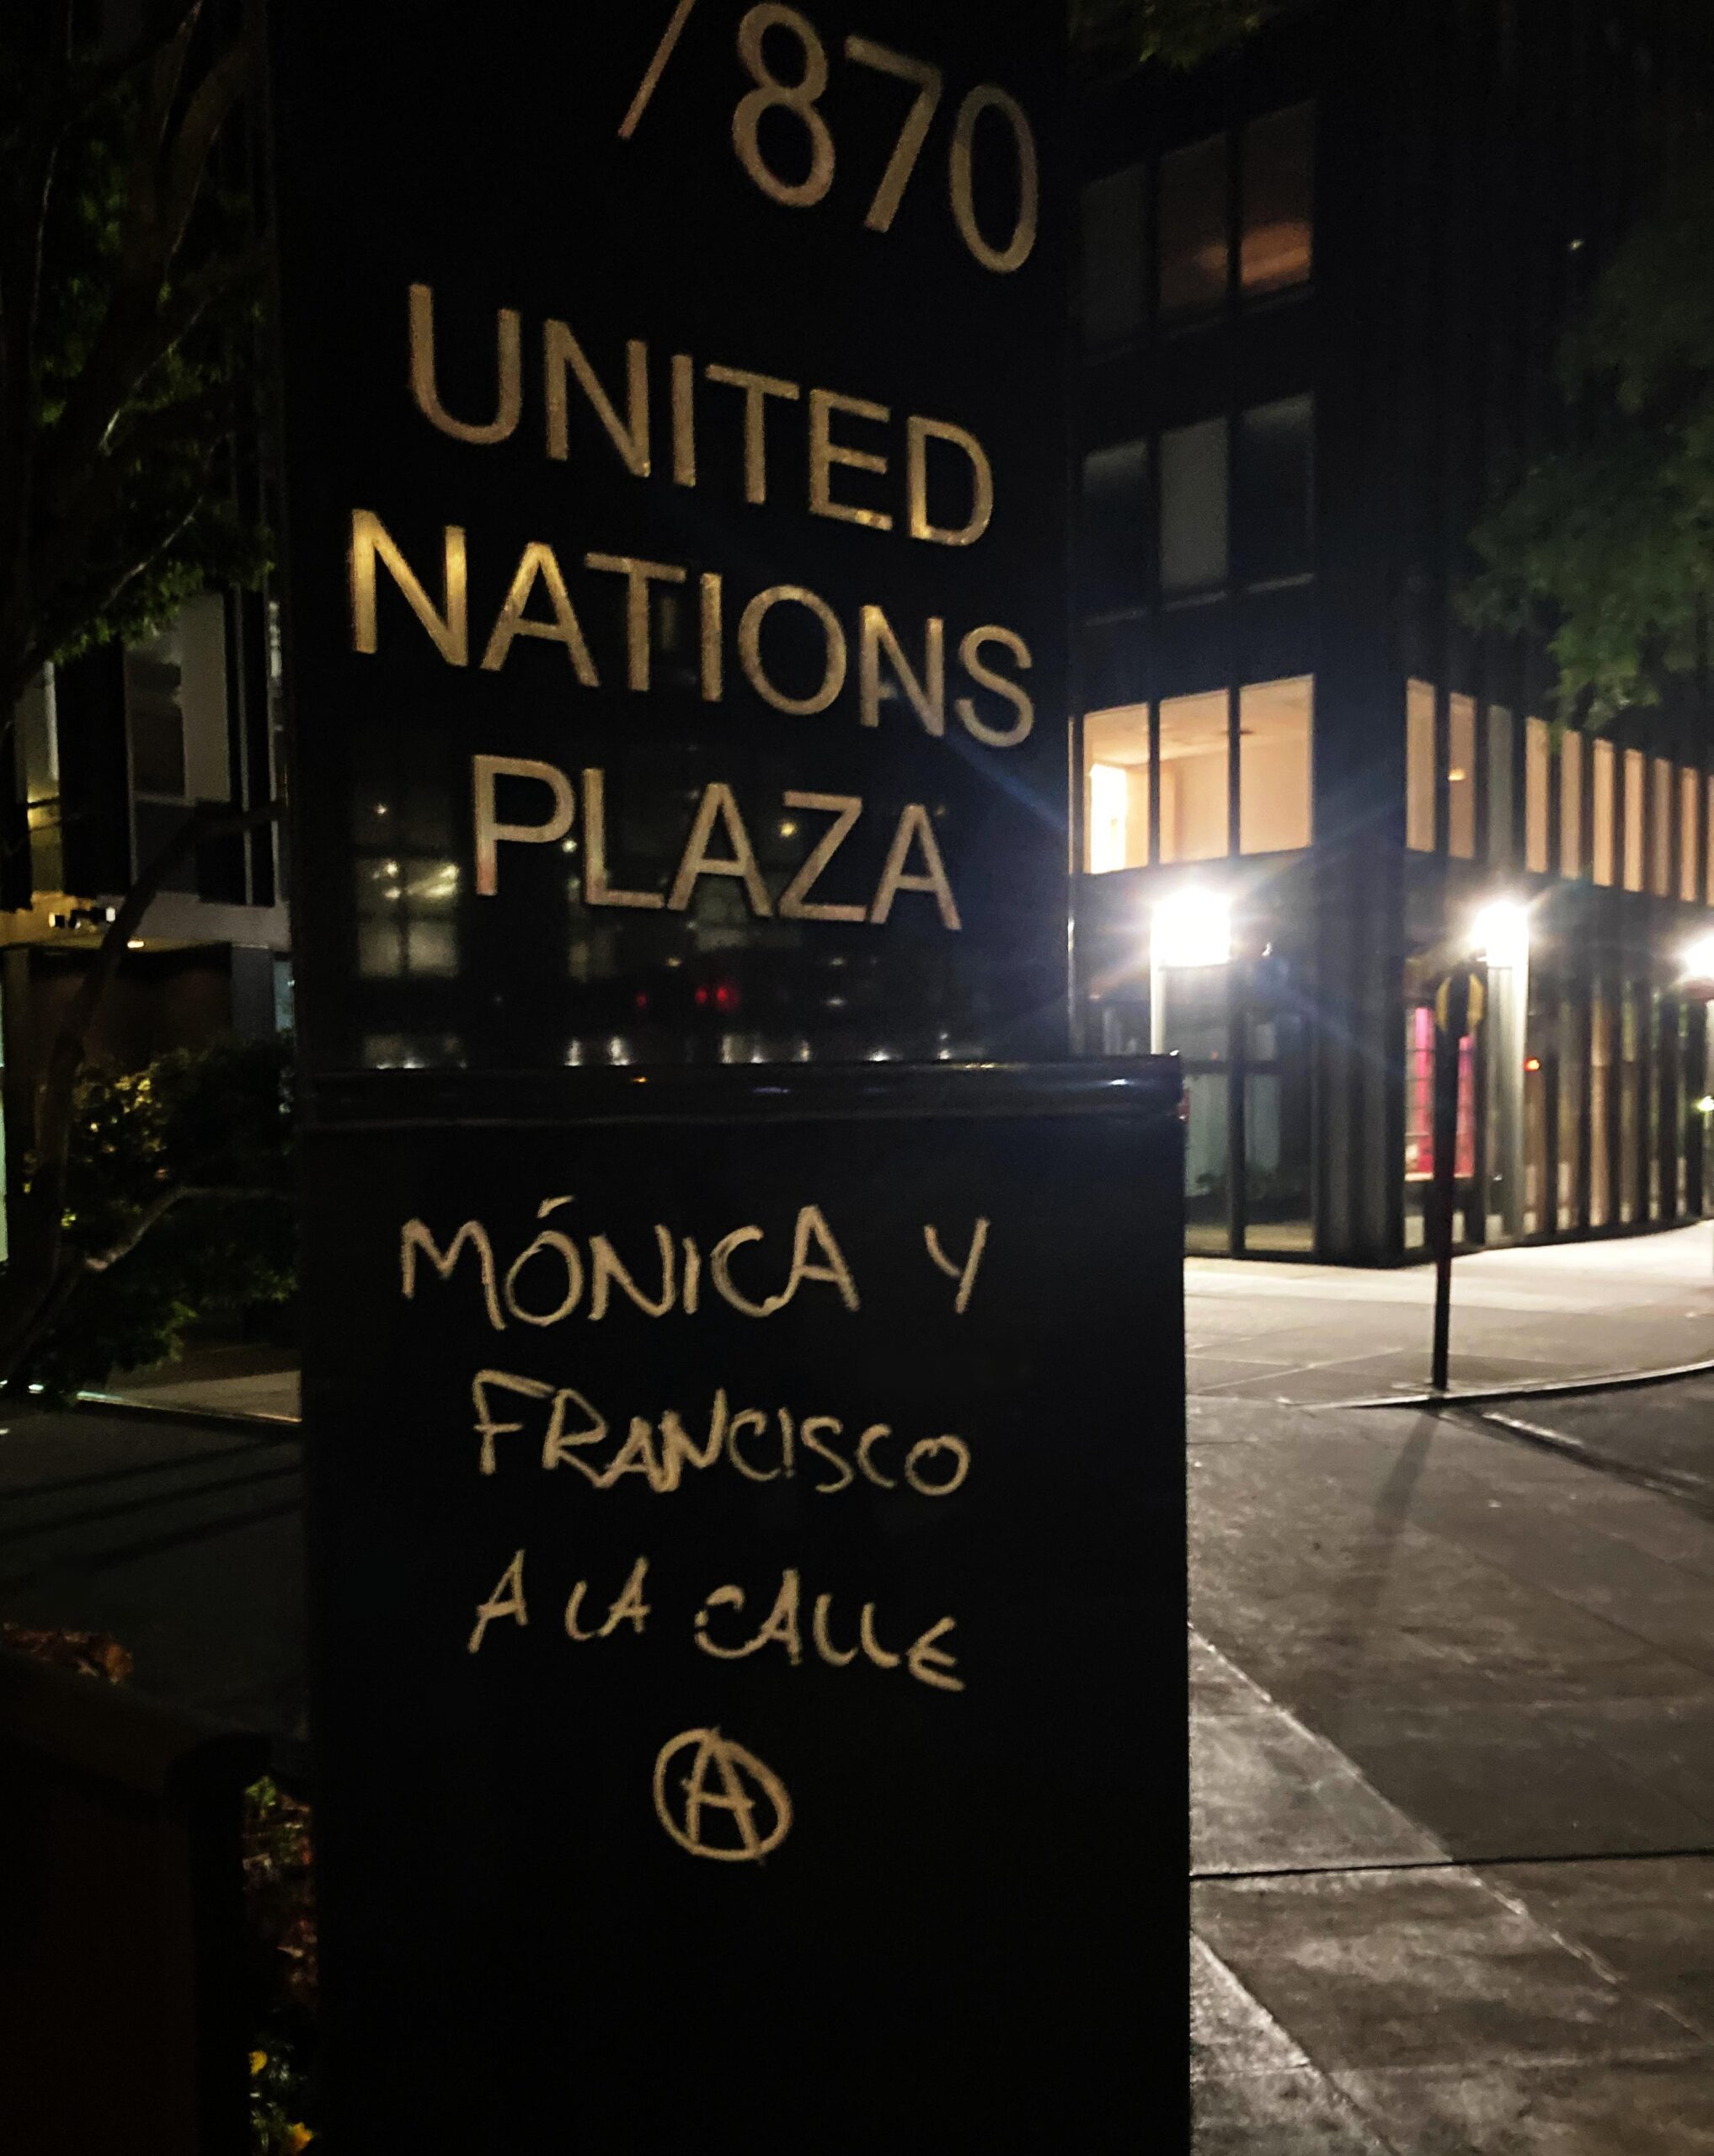 Sign reading "UNITED NATIONS PLAZA" with graffiti reading "Monica y Francisco a la calle" with a circle-A.